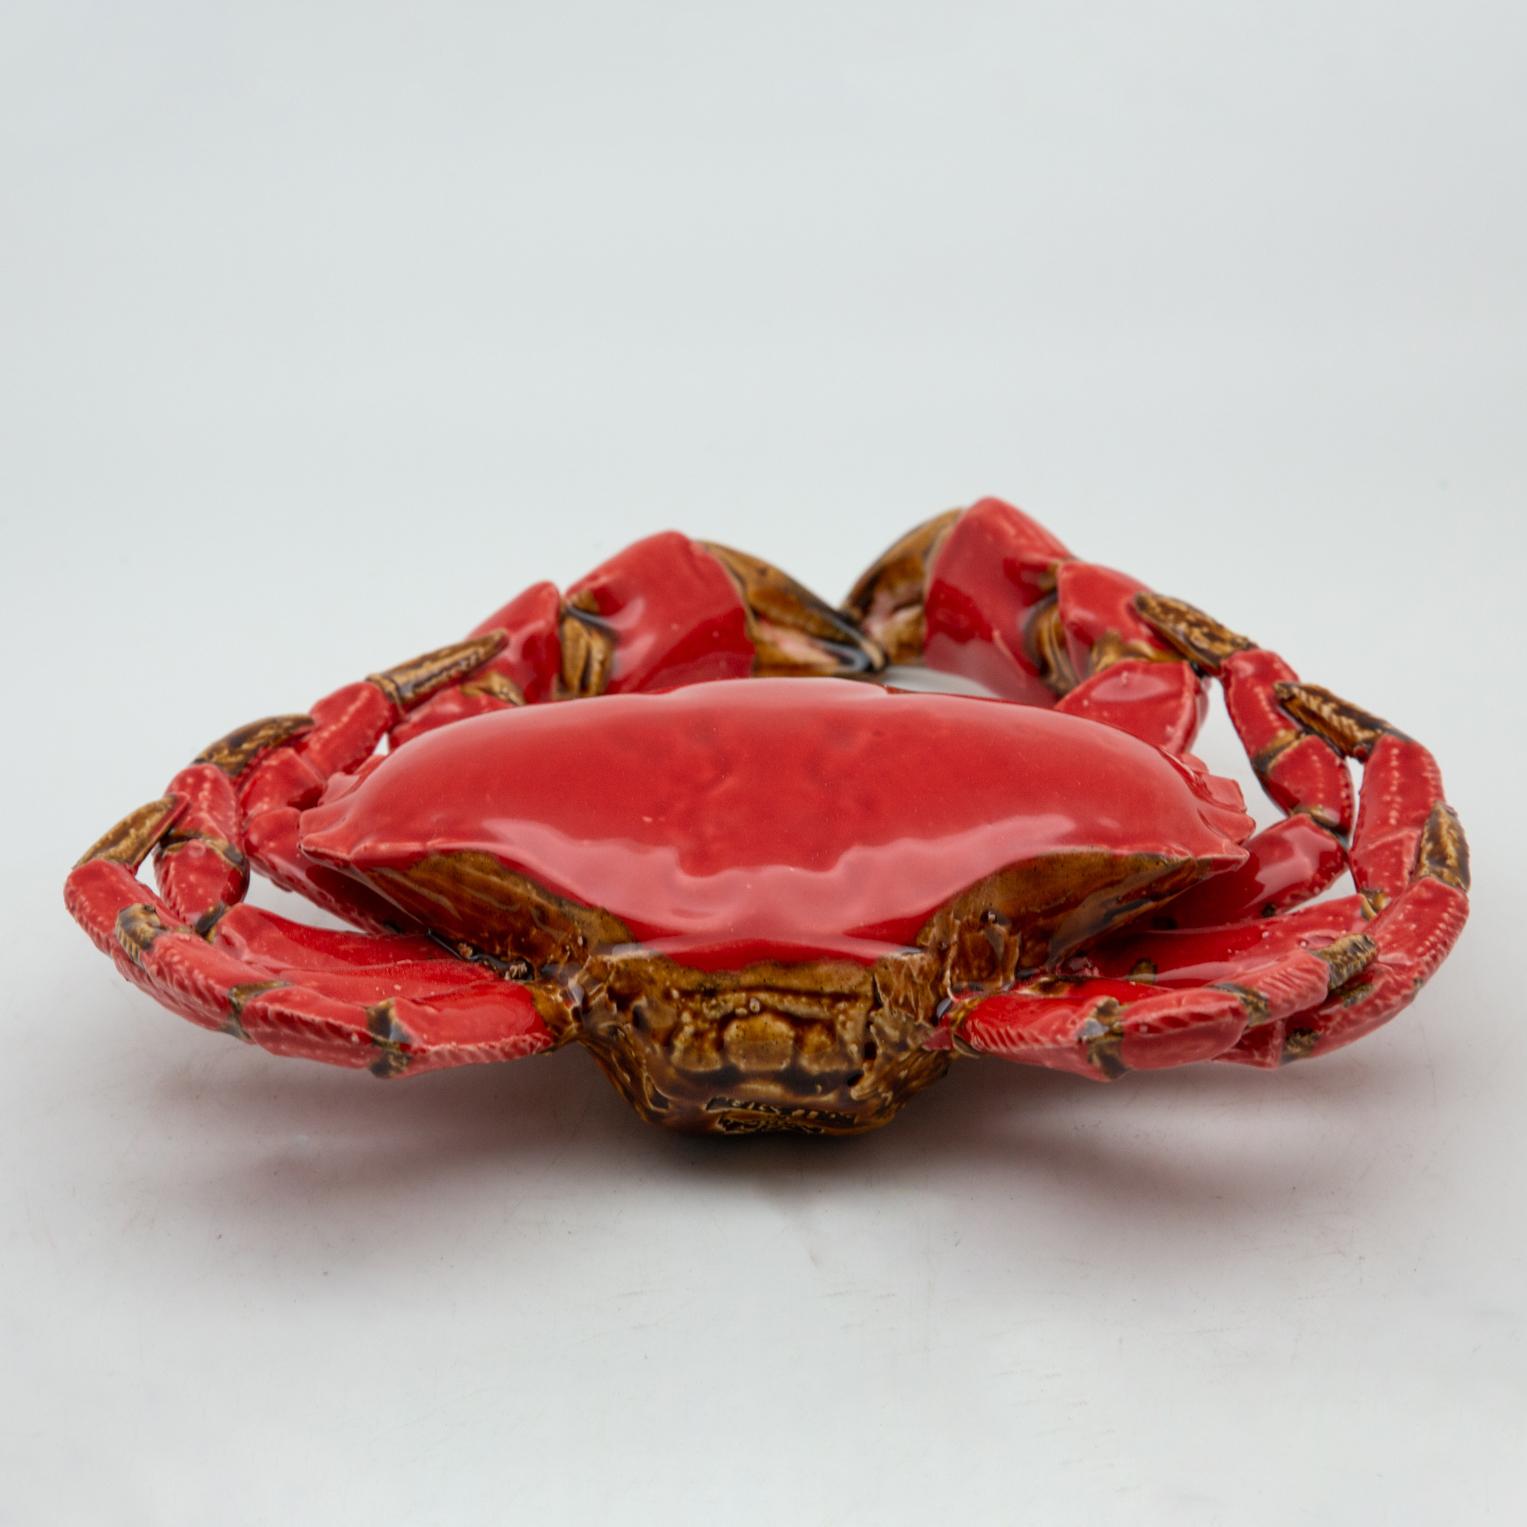 Other Portuguese Handmade Pallissy or Majollica Red Ceramic Crab